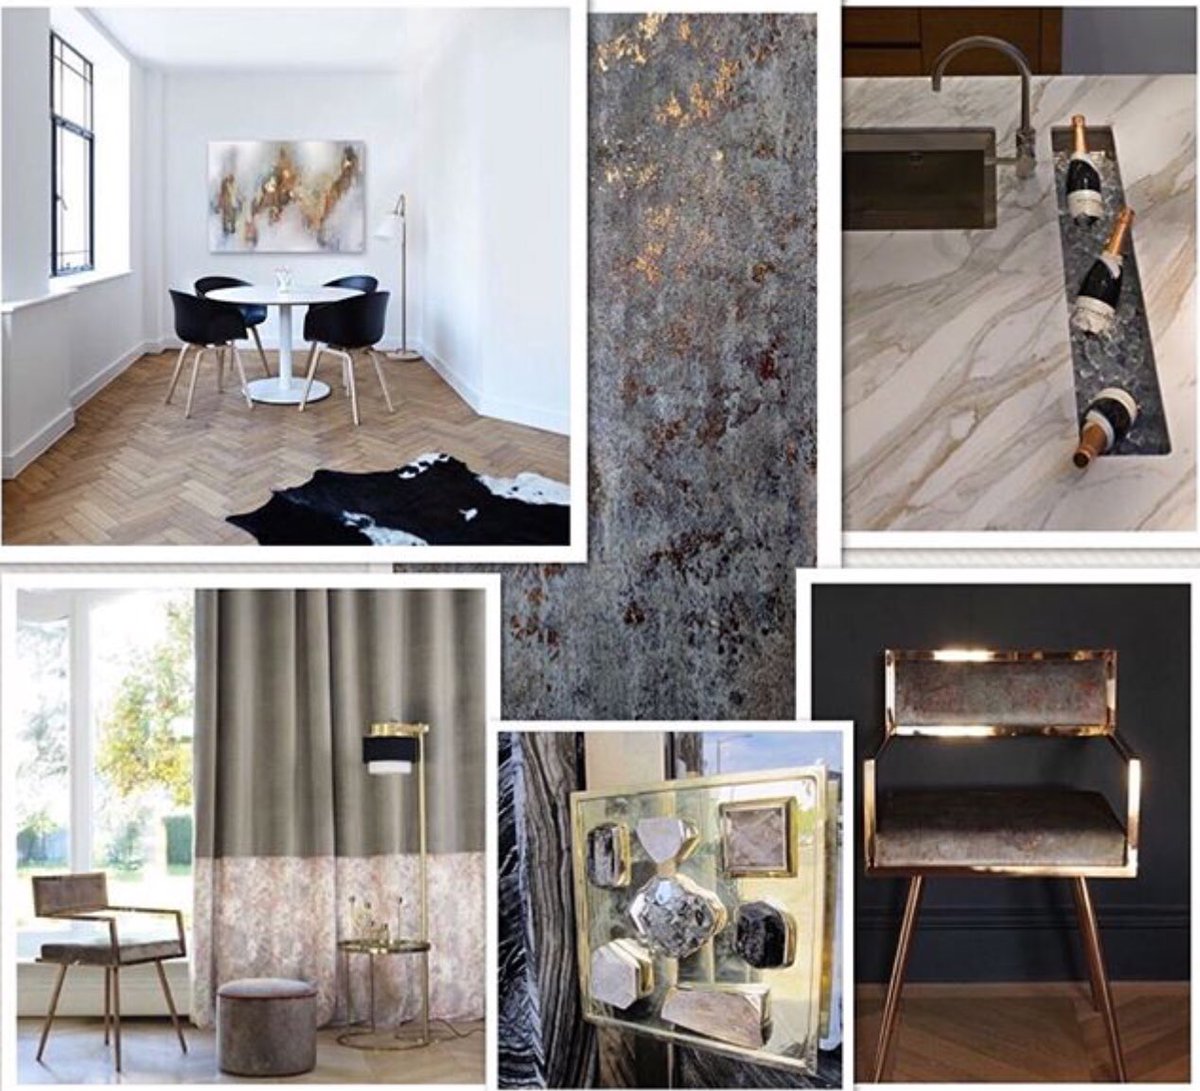 • M O O D • Monday Mood Board.....Obsessing over all MARBLE #Monday #MoodBoard #MondayMoodBoard #Inspo #Marble #Fabric #ItalianMarble #Fabric #Upholstery #Interiors #InteriorDesign #InteriorDecor #InteriorStyling #Home #HomeInspo #HomeStyling #ModernHome #StylishHome